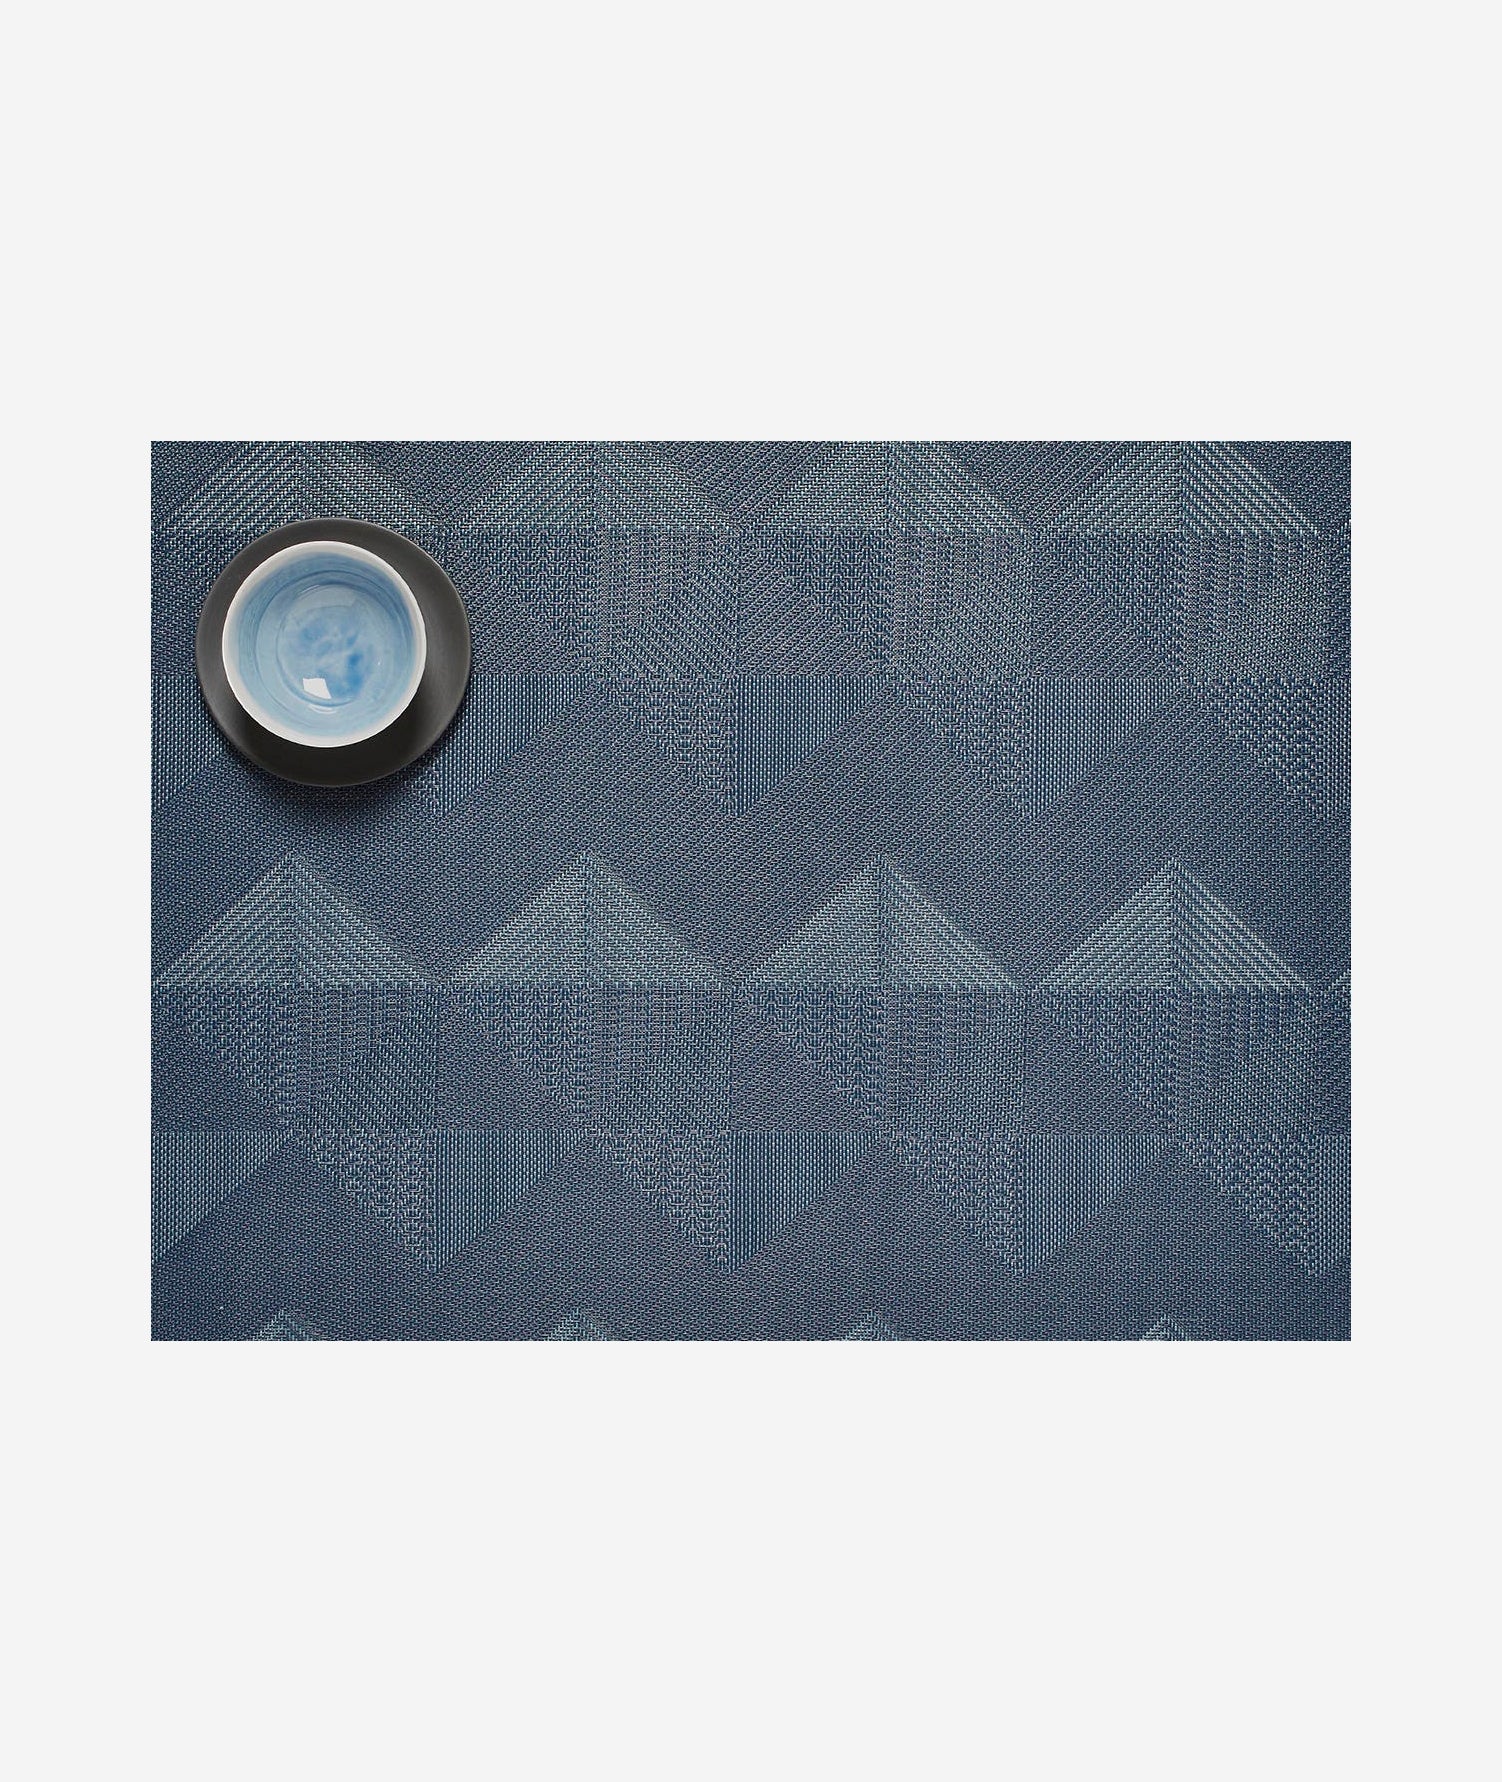 Quilted Placemat Set/4 - More Options